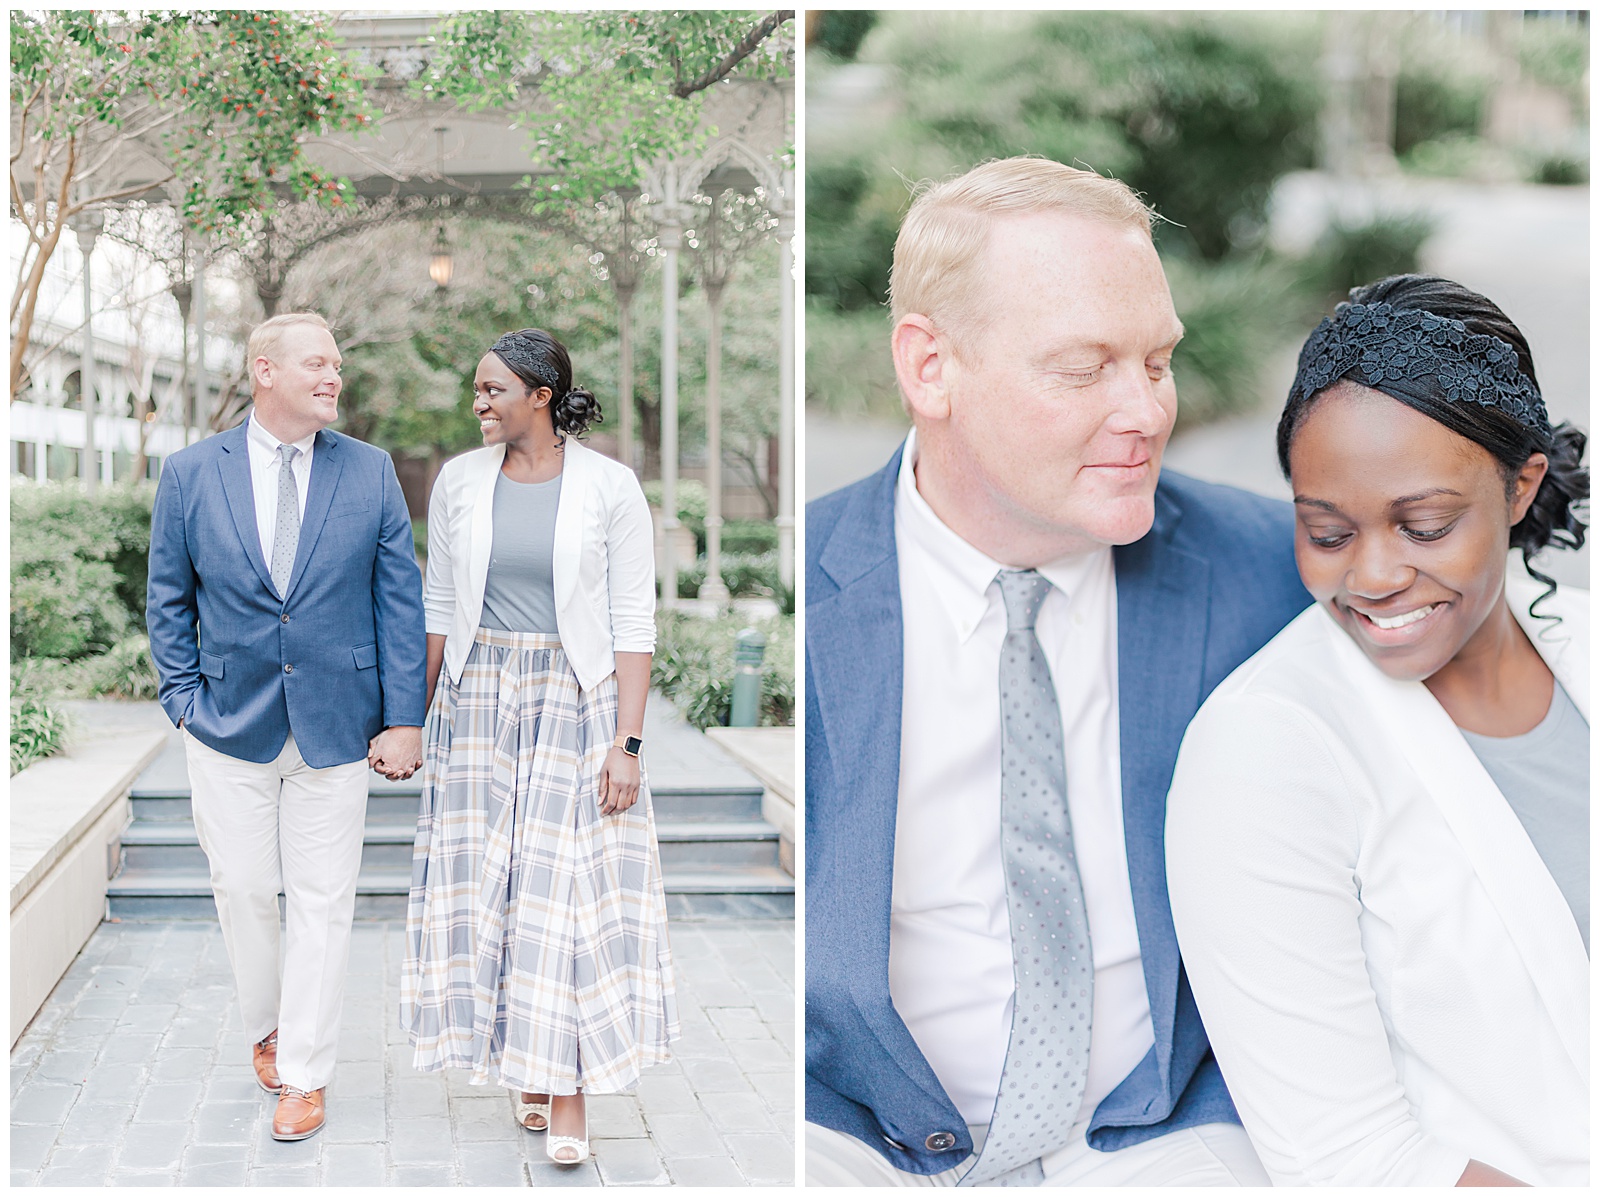 Mixed couple engagement pictures at Crescent Court in Dallas